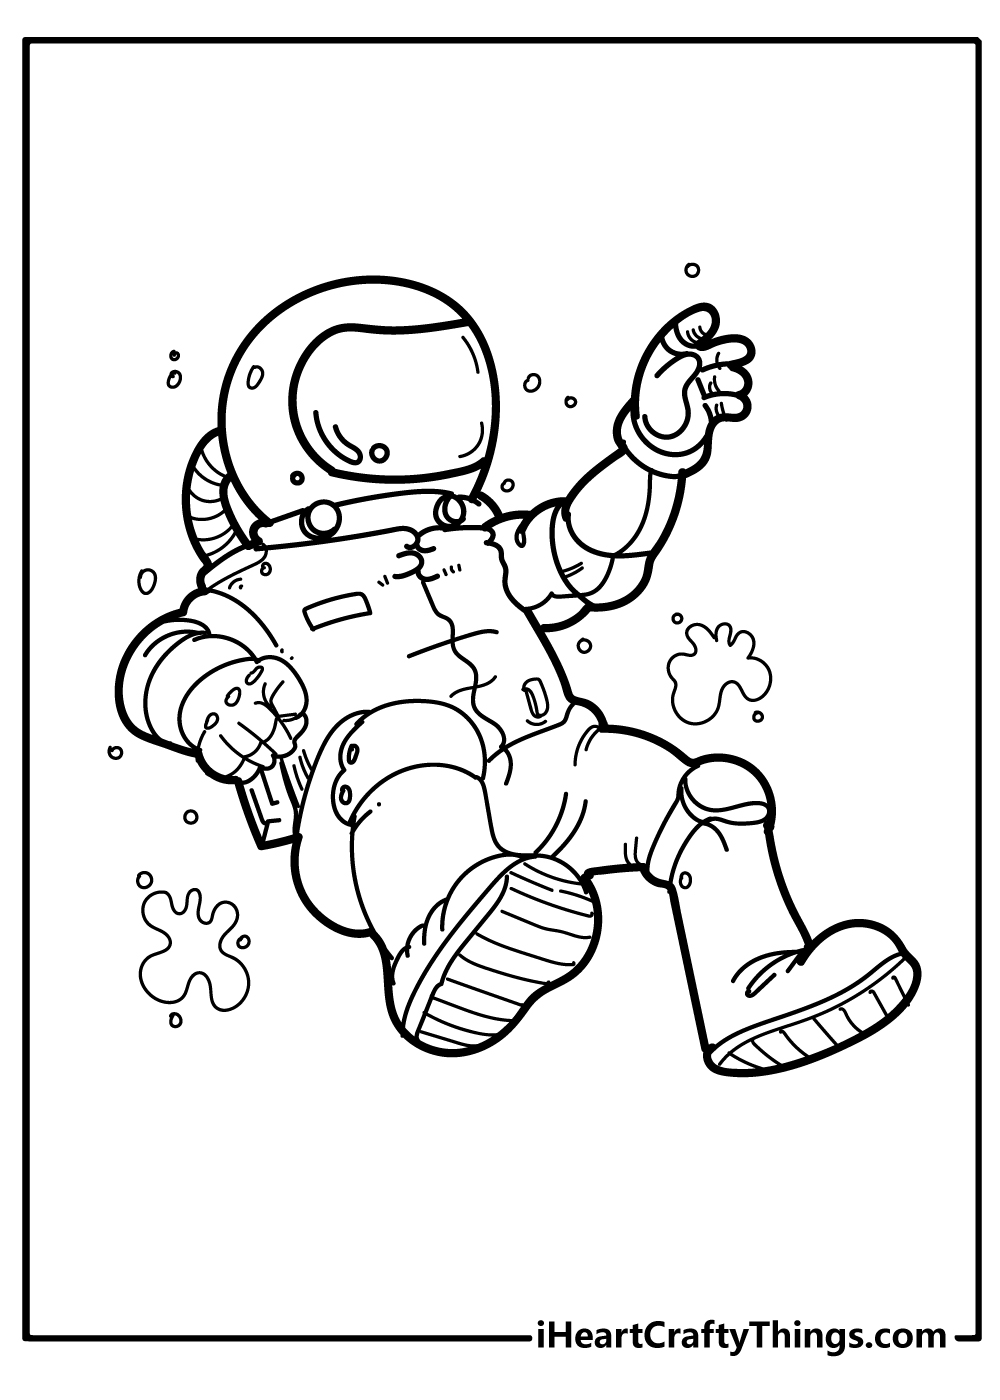 Astronaut Coloring Book for adults free download